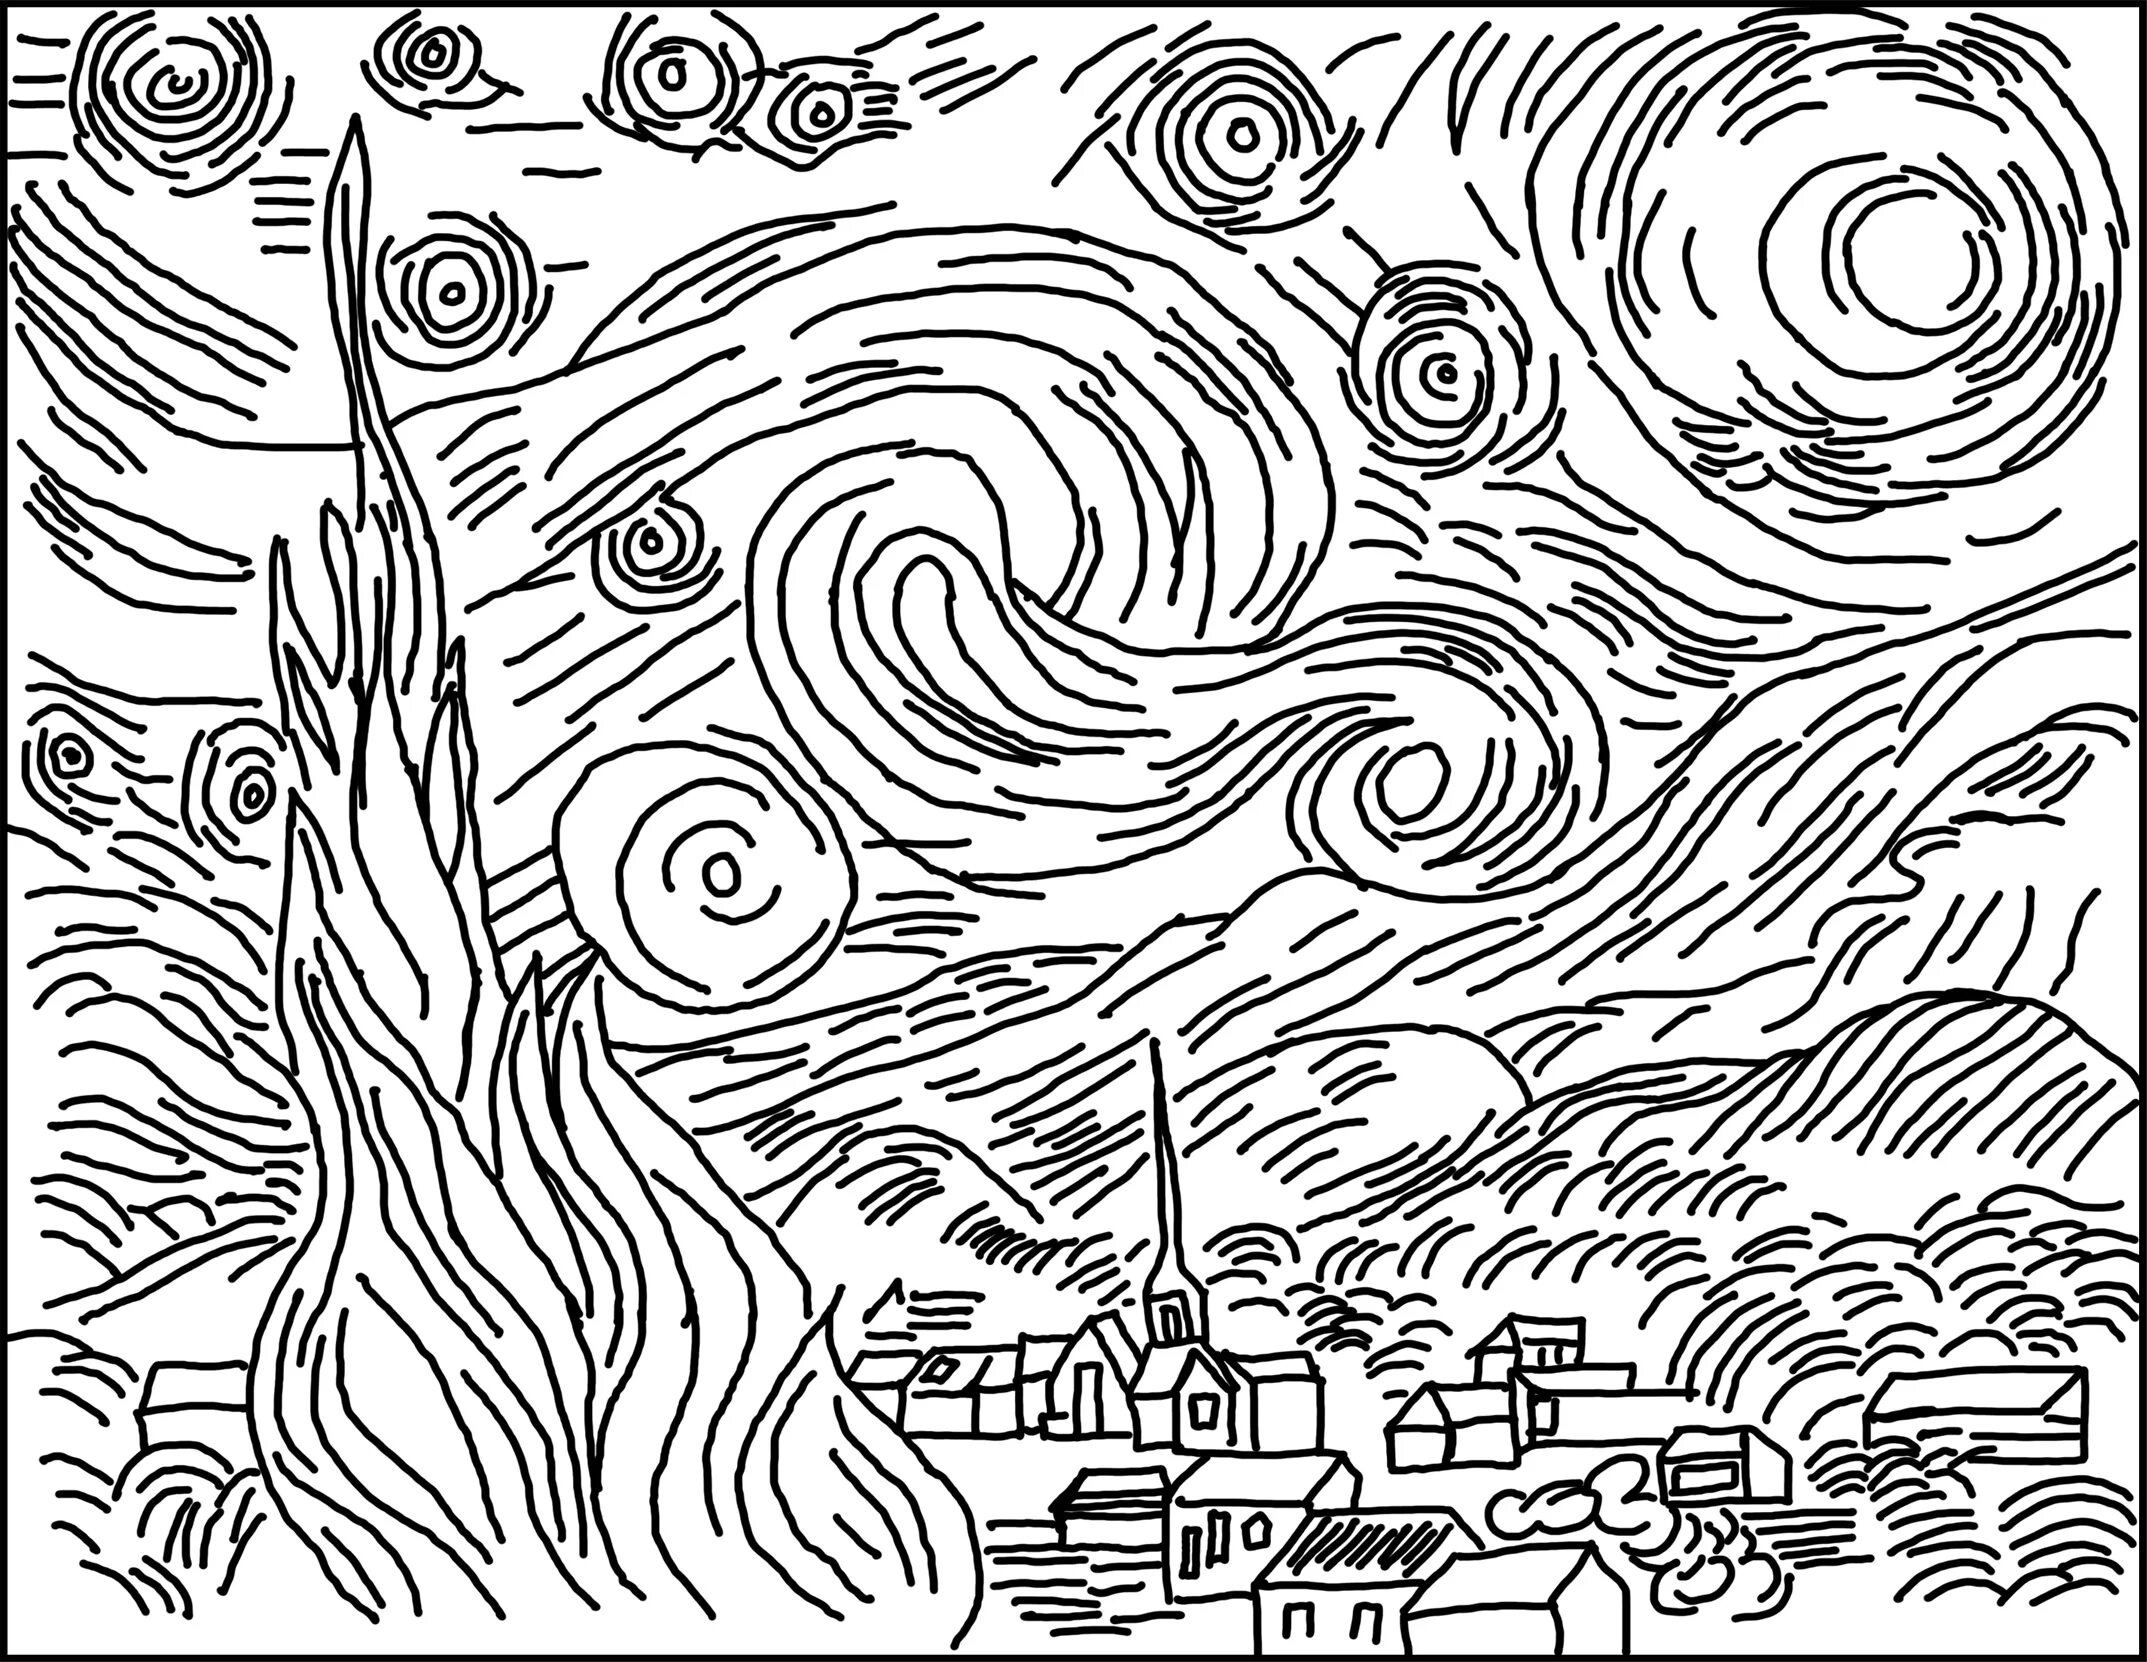 Amazing starry night coloring page